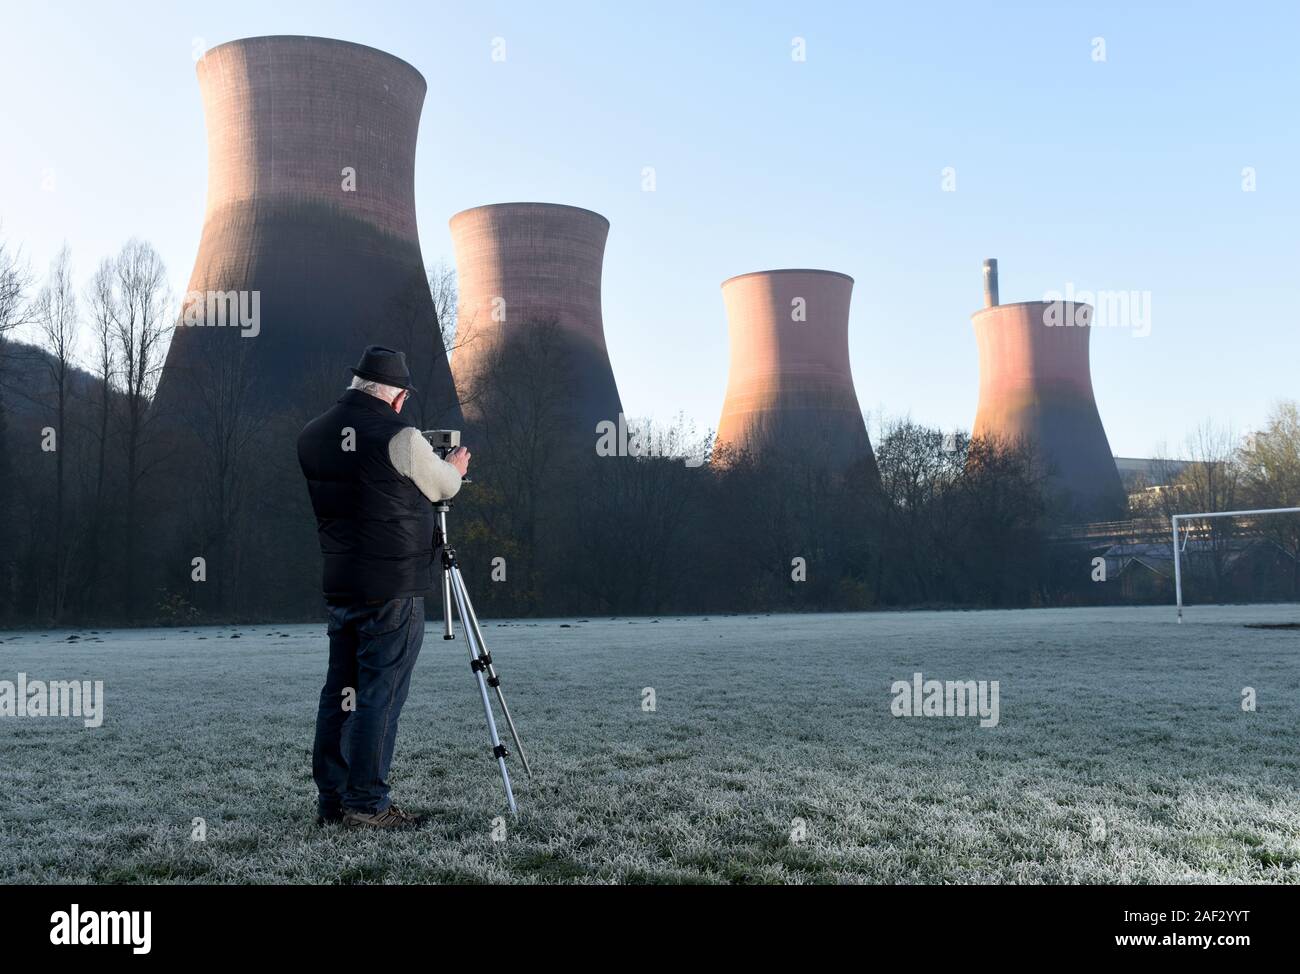 Landscape photographer using large format Linhof camera on a tripod. Picture by David Bagnall, Stock Photo